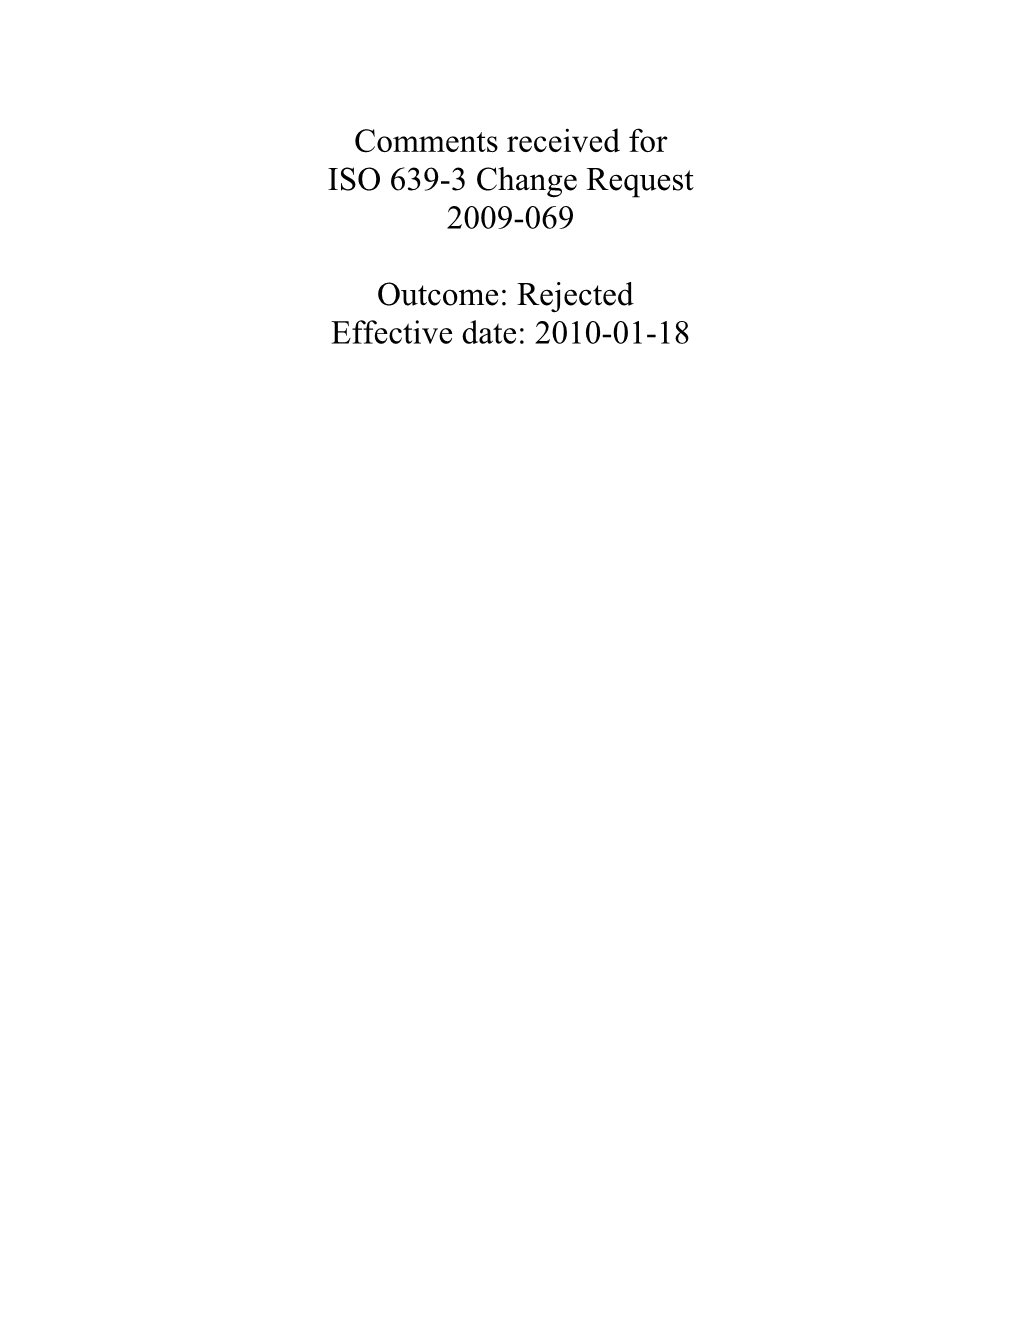 Comments Received for ISO 639-3 Change Request 2009-069